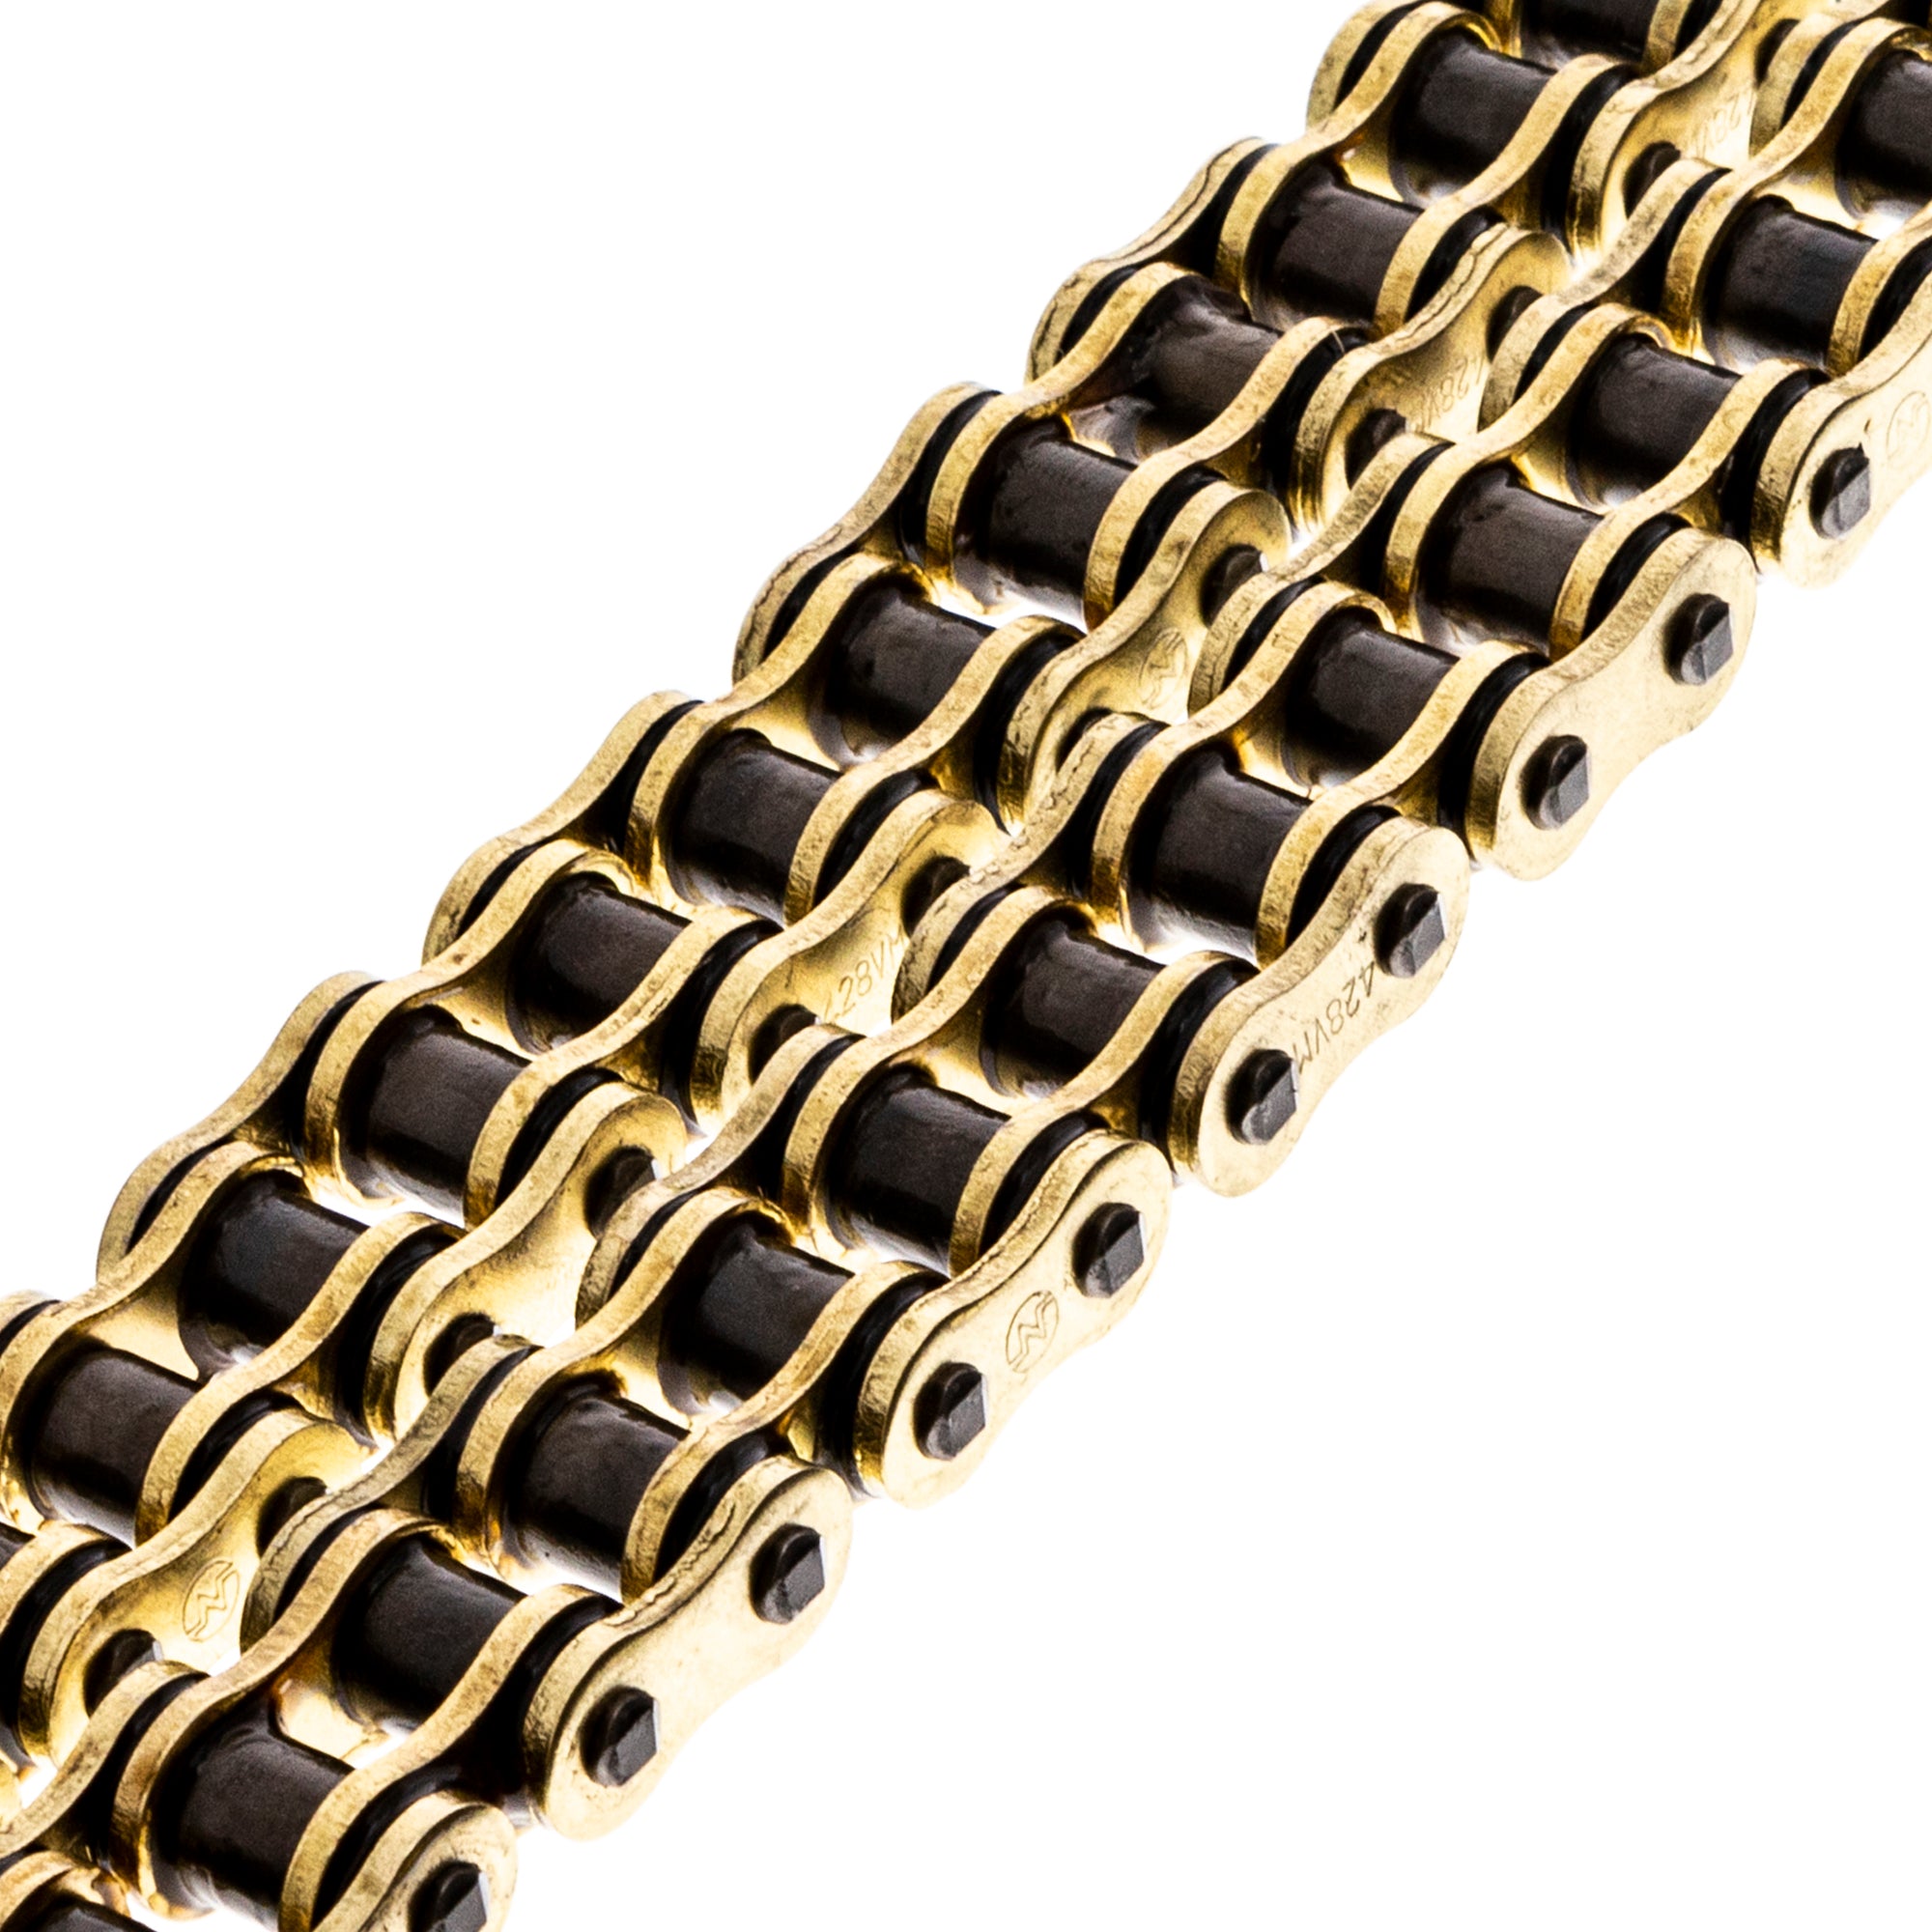 Gold X-Ring Chain 100 w/ Master Link for zOTHER TRX90 SporTrax Mojave KLT110 5437 NICHE 519-CDC2548H